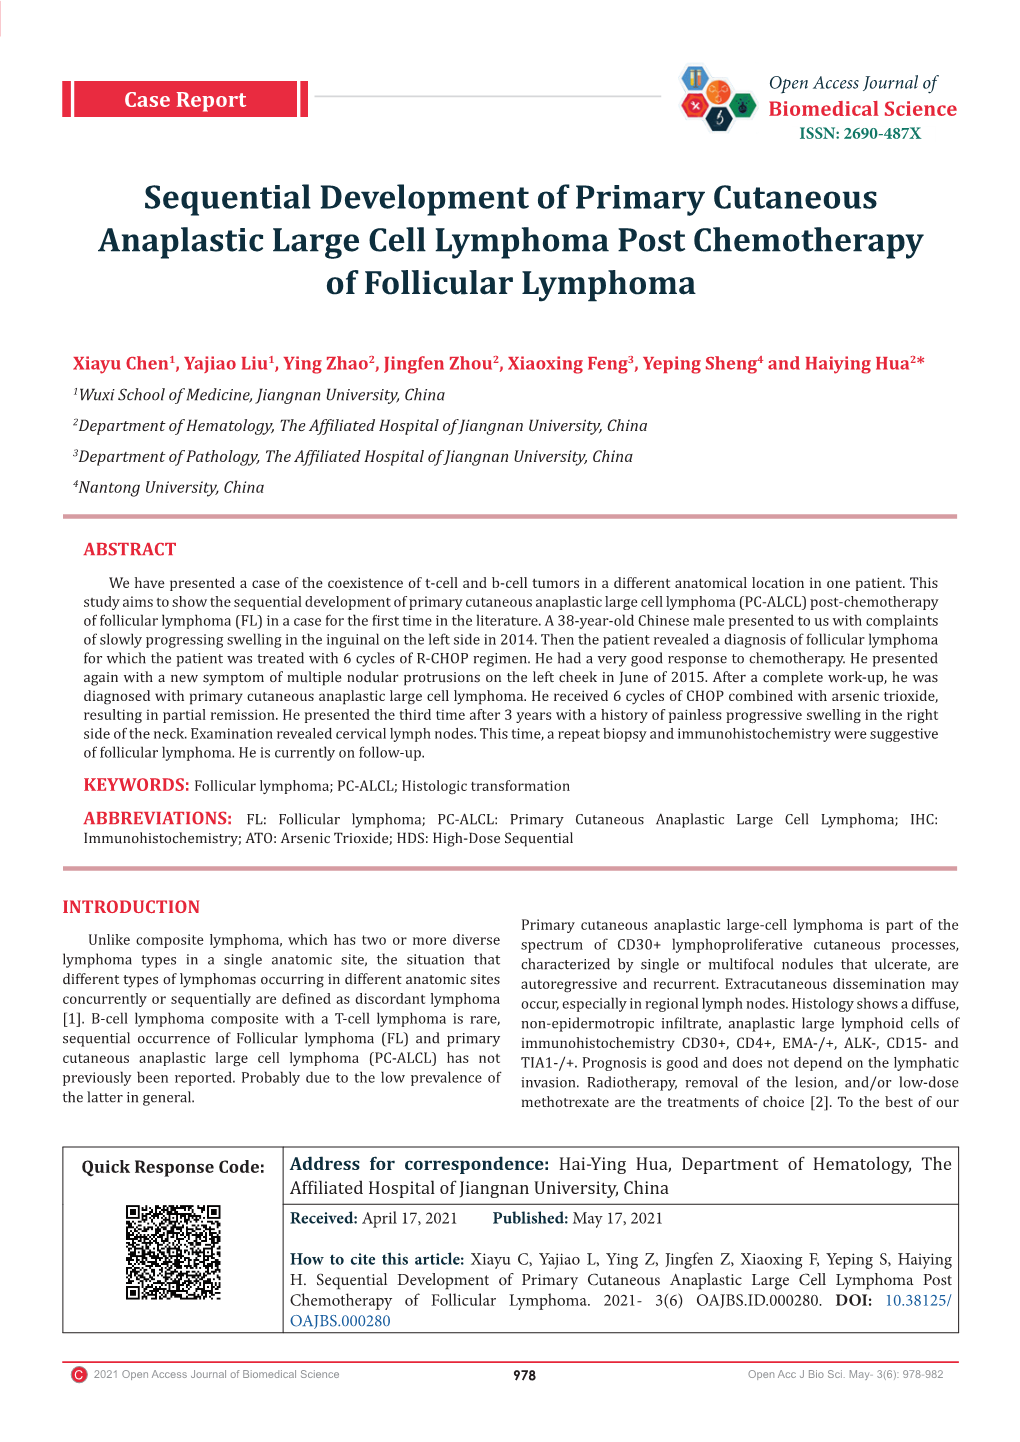 Sequential Development of Primary Cutaneous Anaplastic Large Cell Lymphoma Post Chemotherapy of Follicular Lymphoma